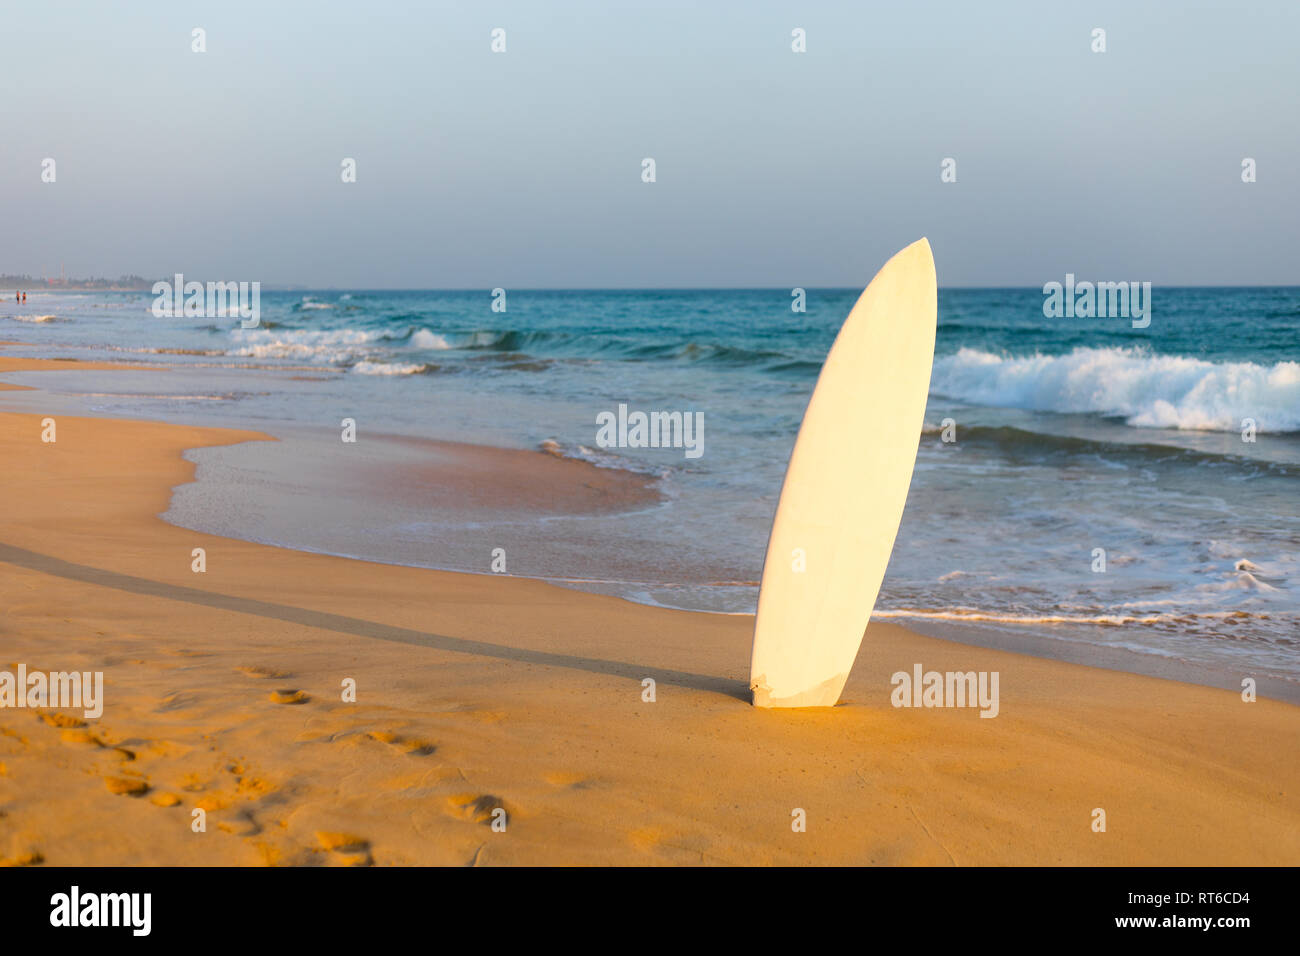 Surfboard stuck in the sand to the beach. Stock Photo